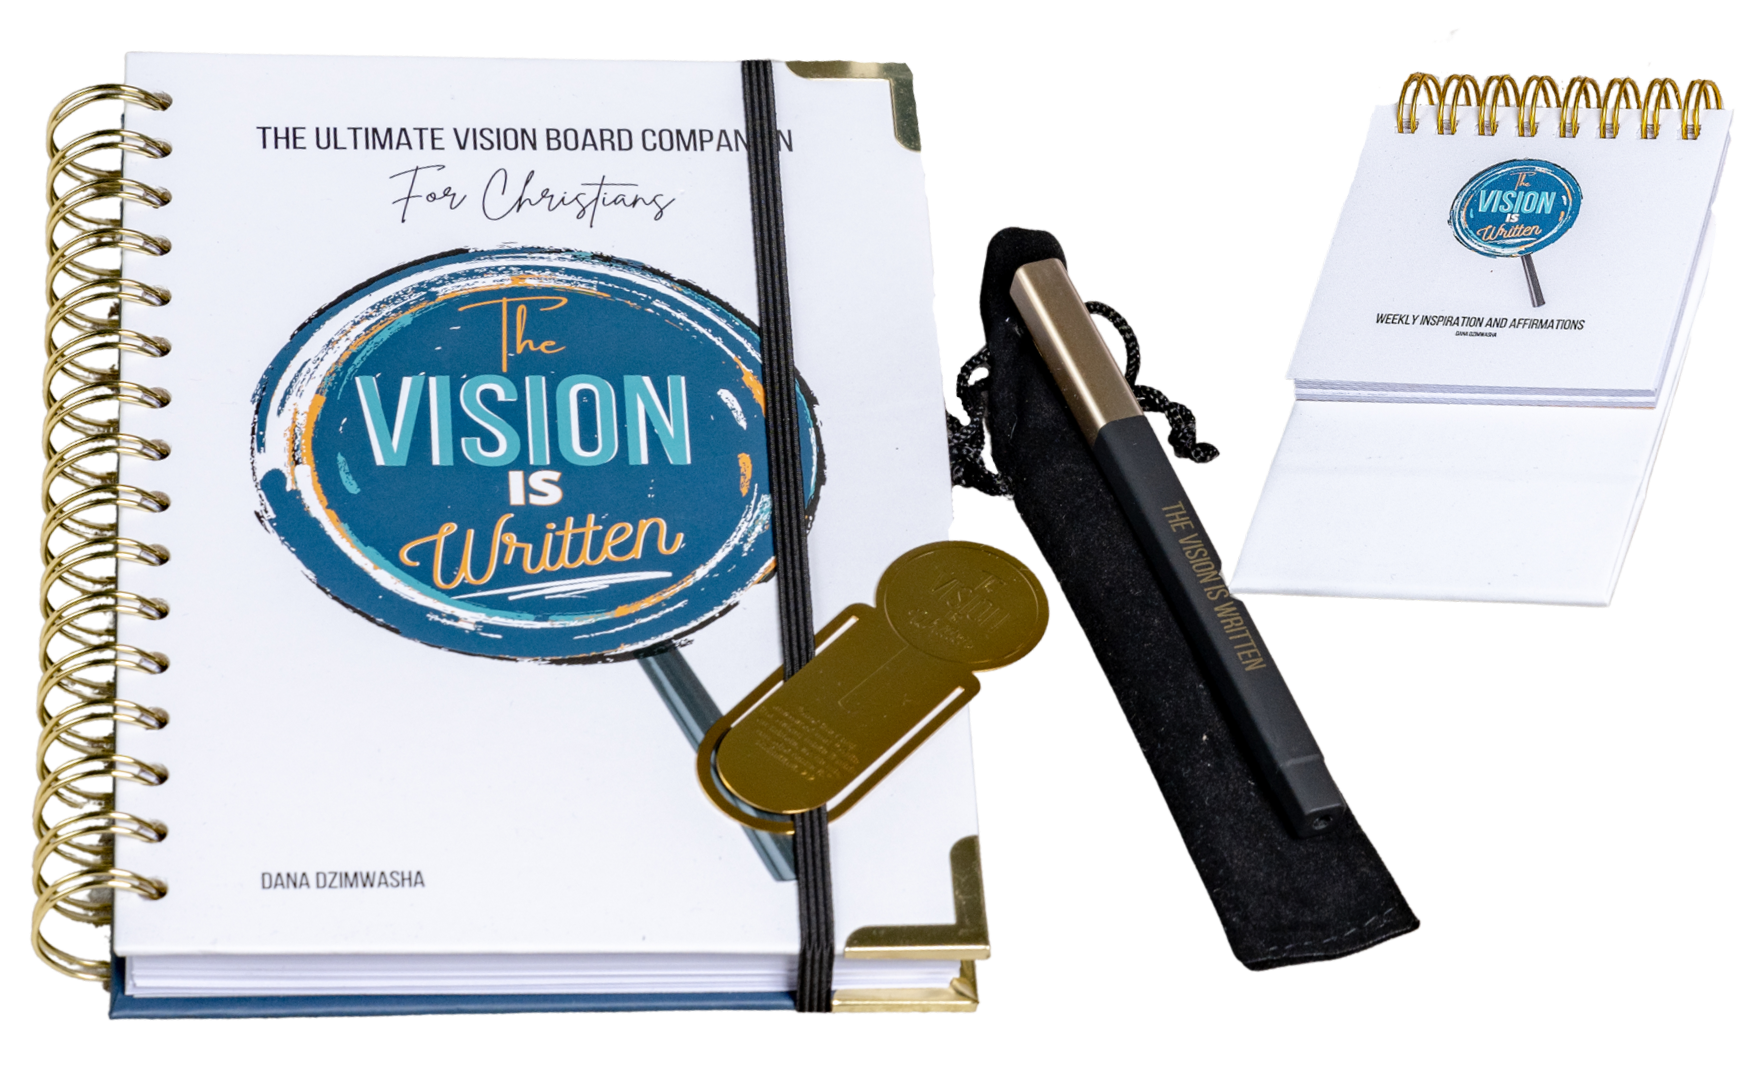 The Vision Is Written Gift Set